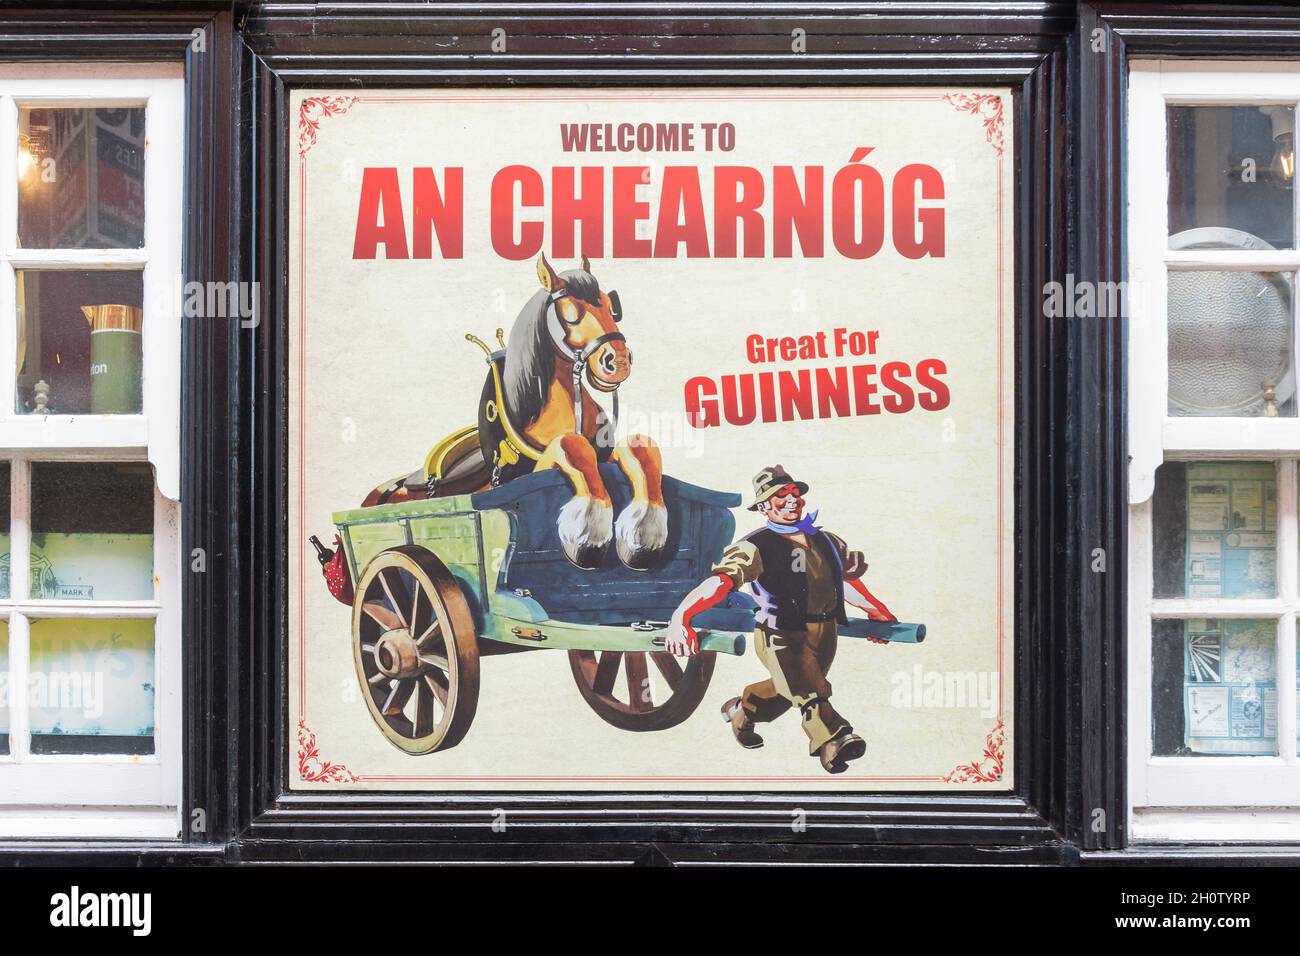 Retro Guinness advert on pub exterior, The Square Bar, The Square, Tralee (Tra Li), County Kerry, Republic of Ireland Stock Photo